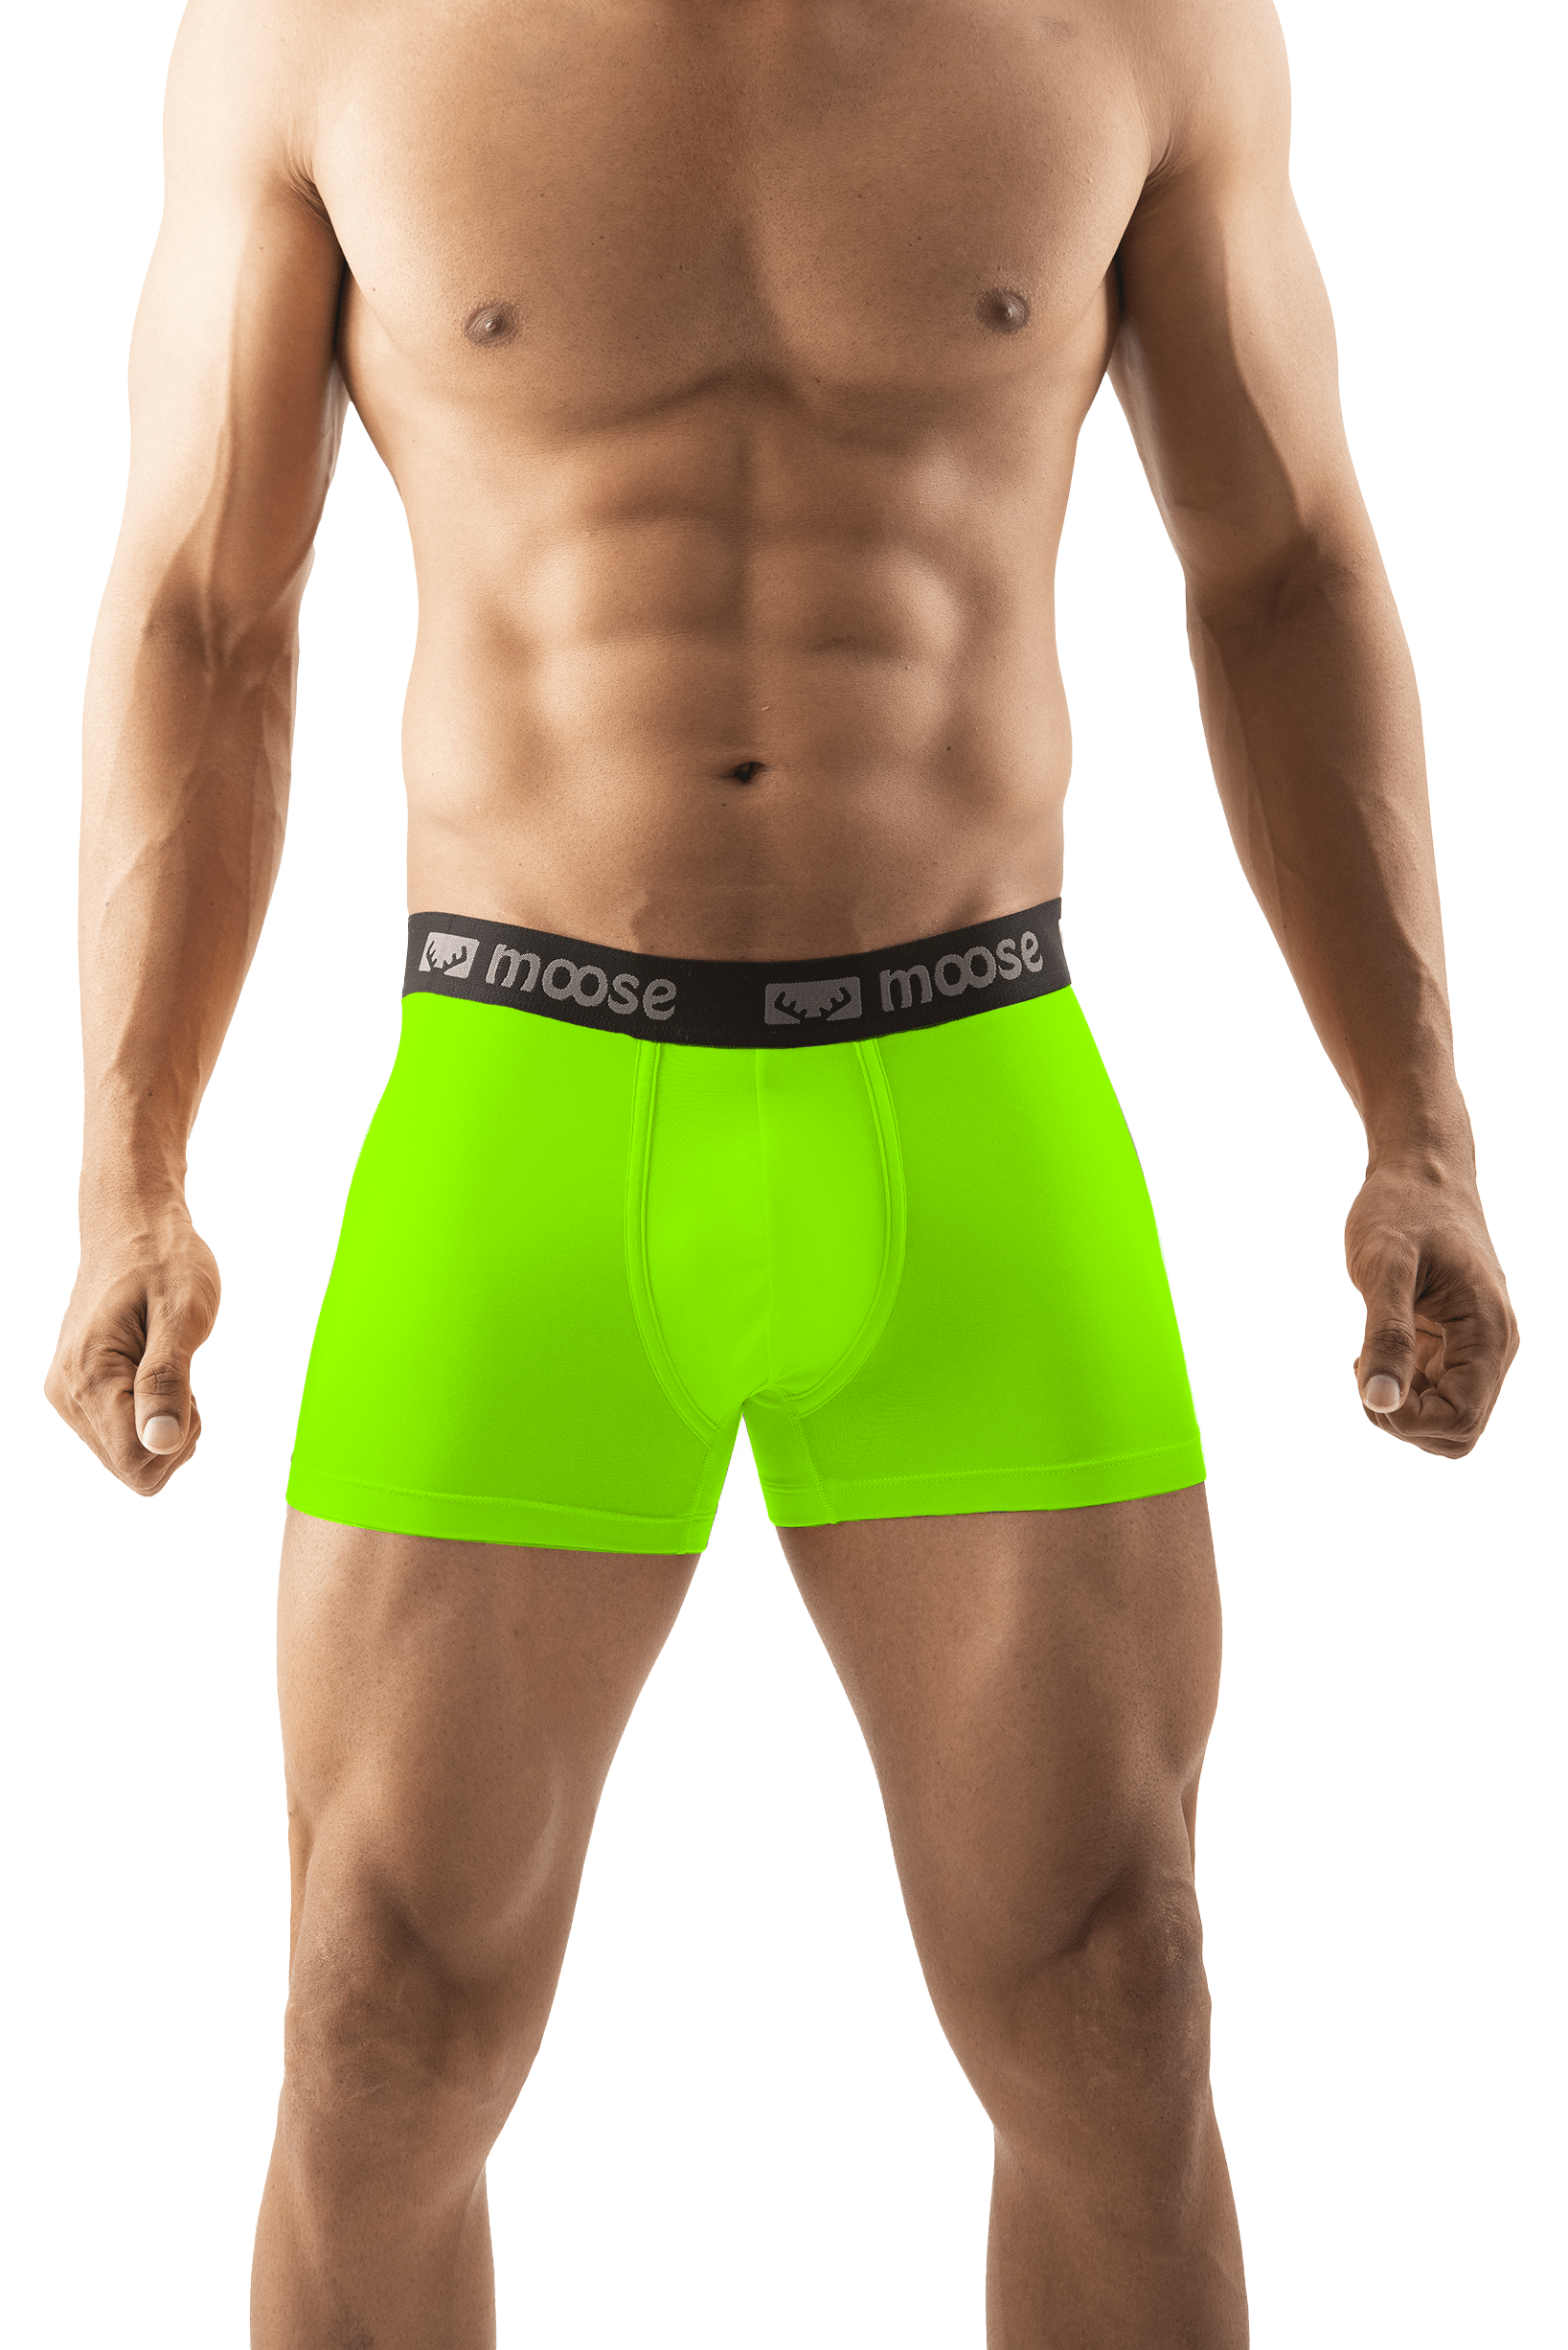 Brand Logo Mens Boxer Shorts Manufacturers, Daily Wear at Rs 250